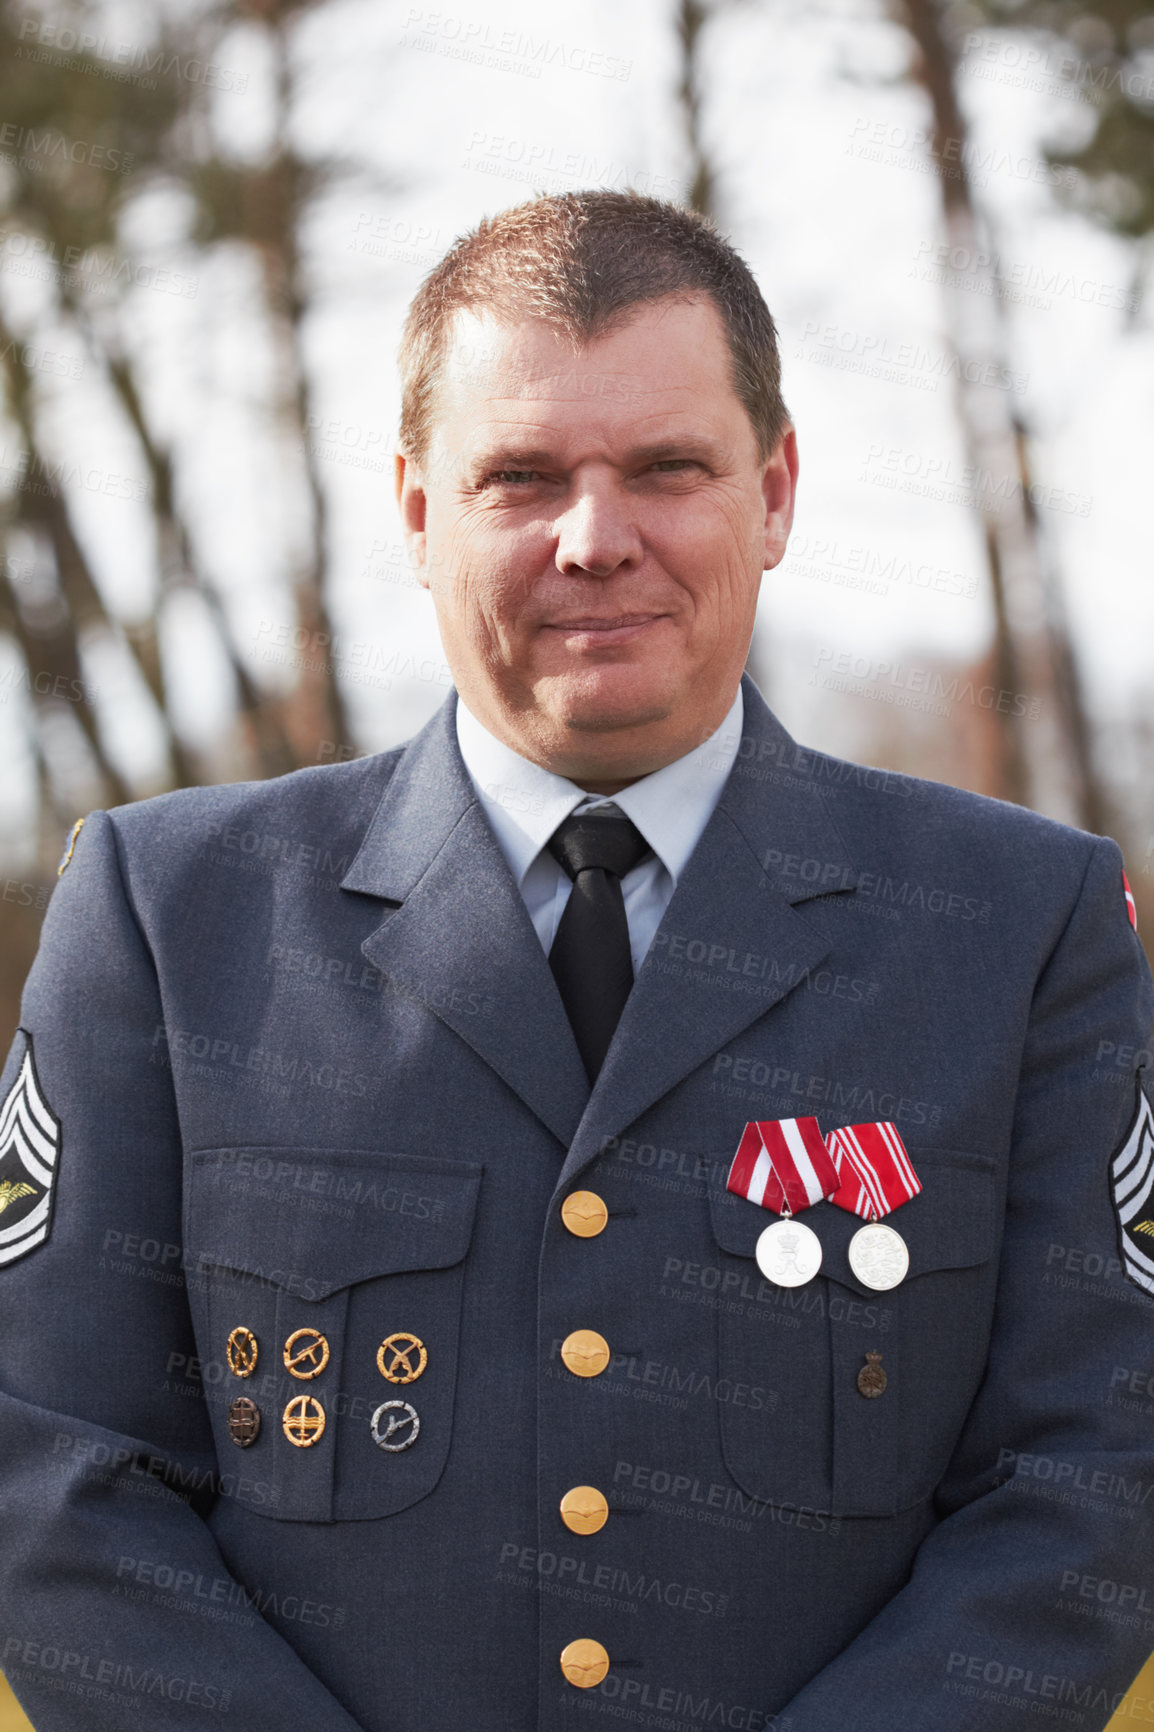 Buy stock photo Cropped portrait of a high ranking military official standing outside